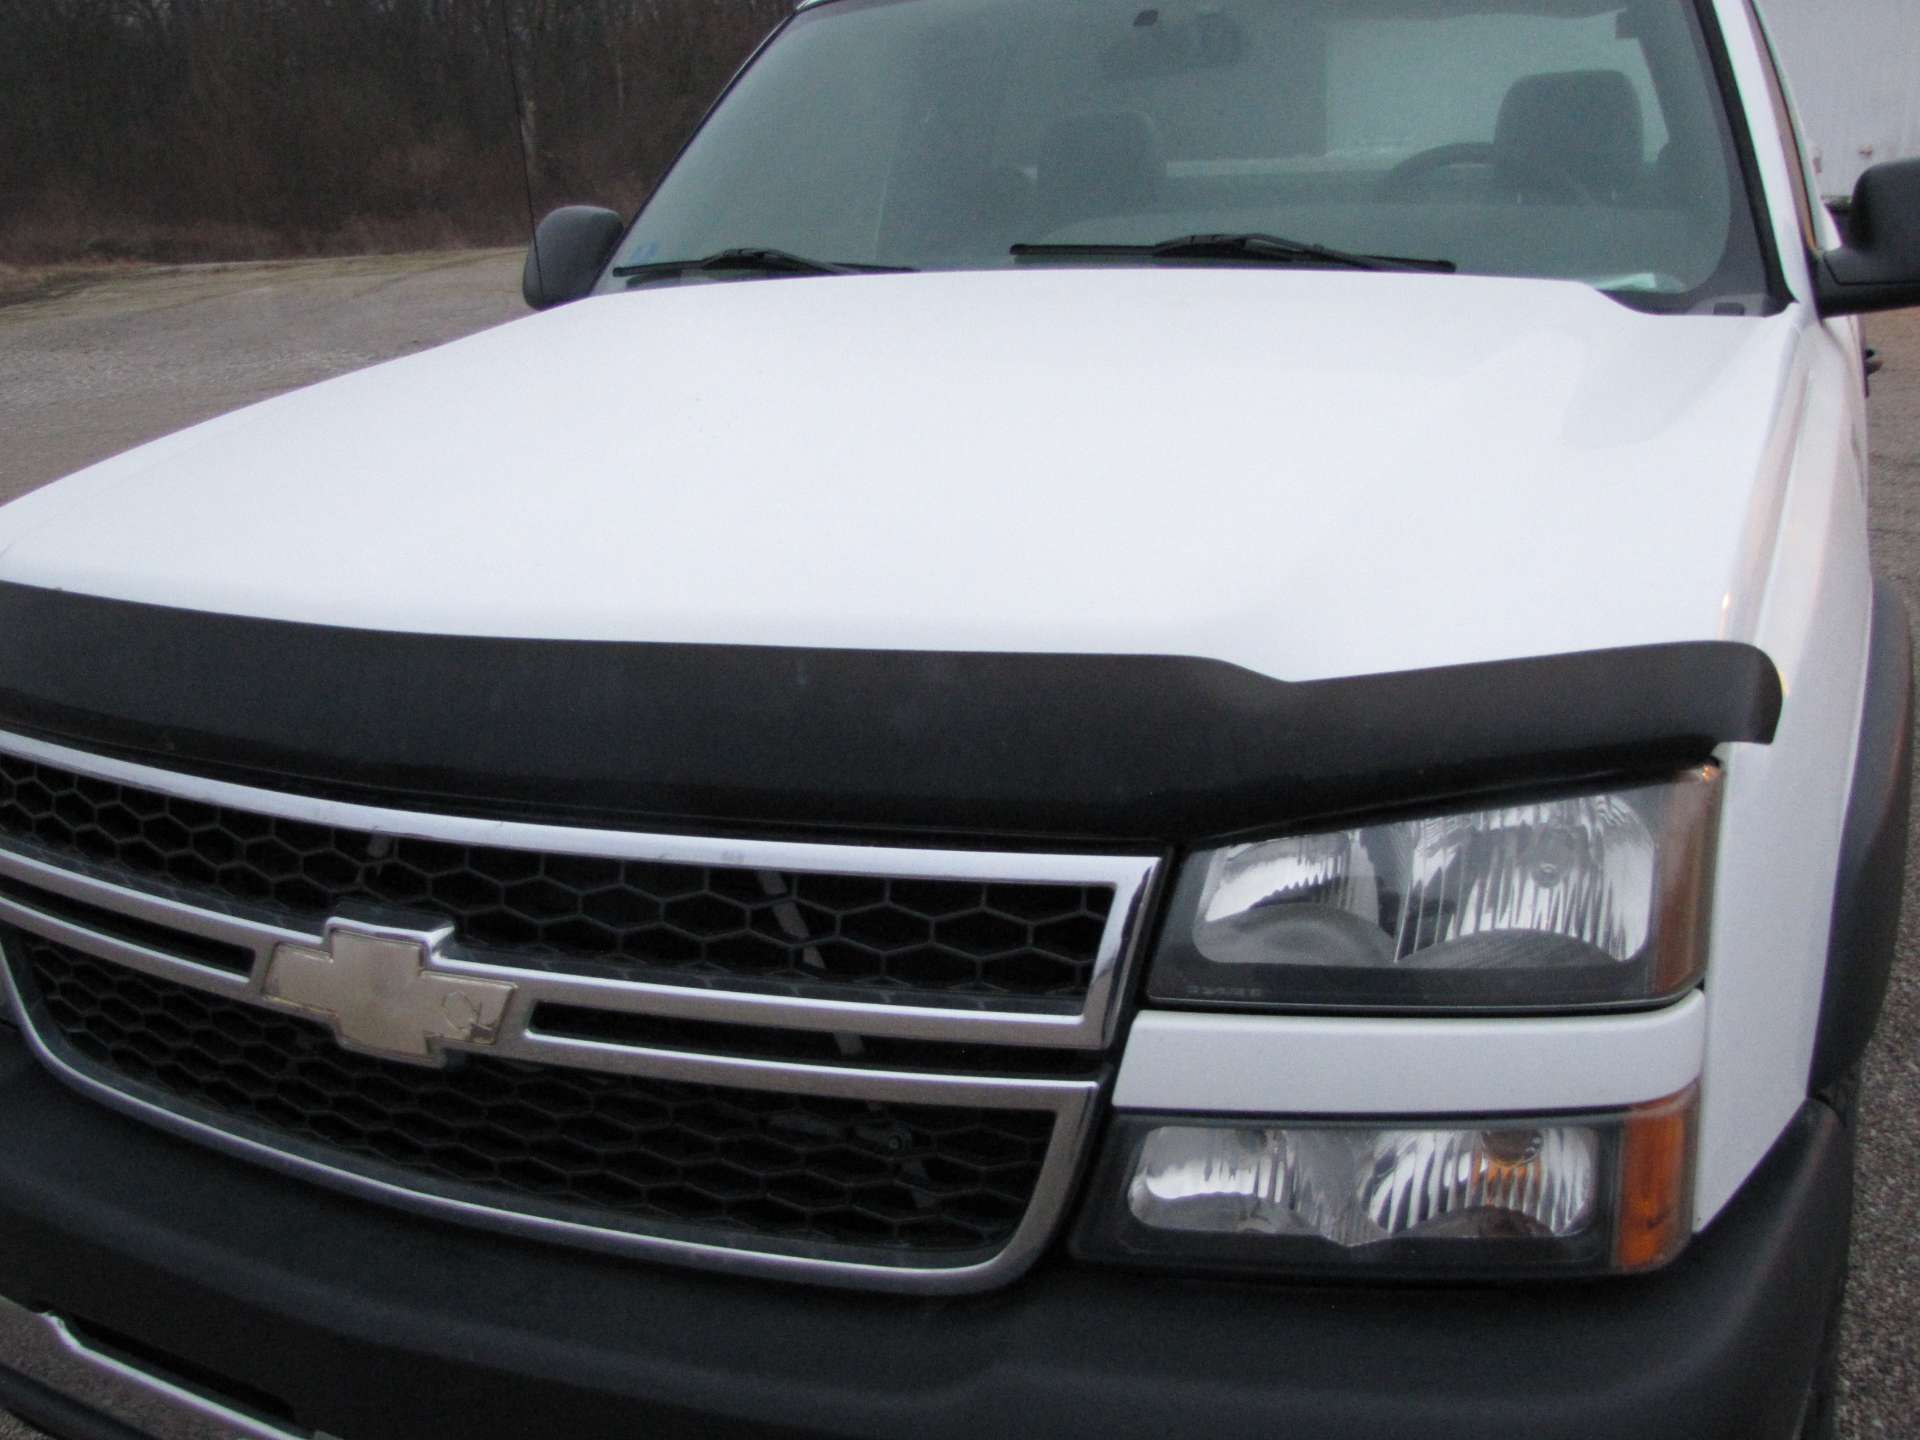 2006 Chevy 2500 HD pickup truck - Image 16 of 65